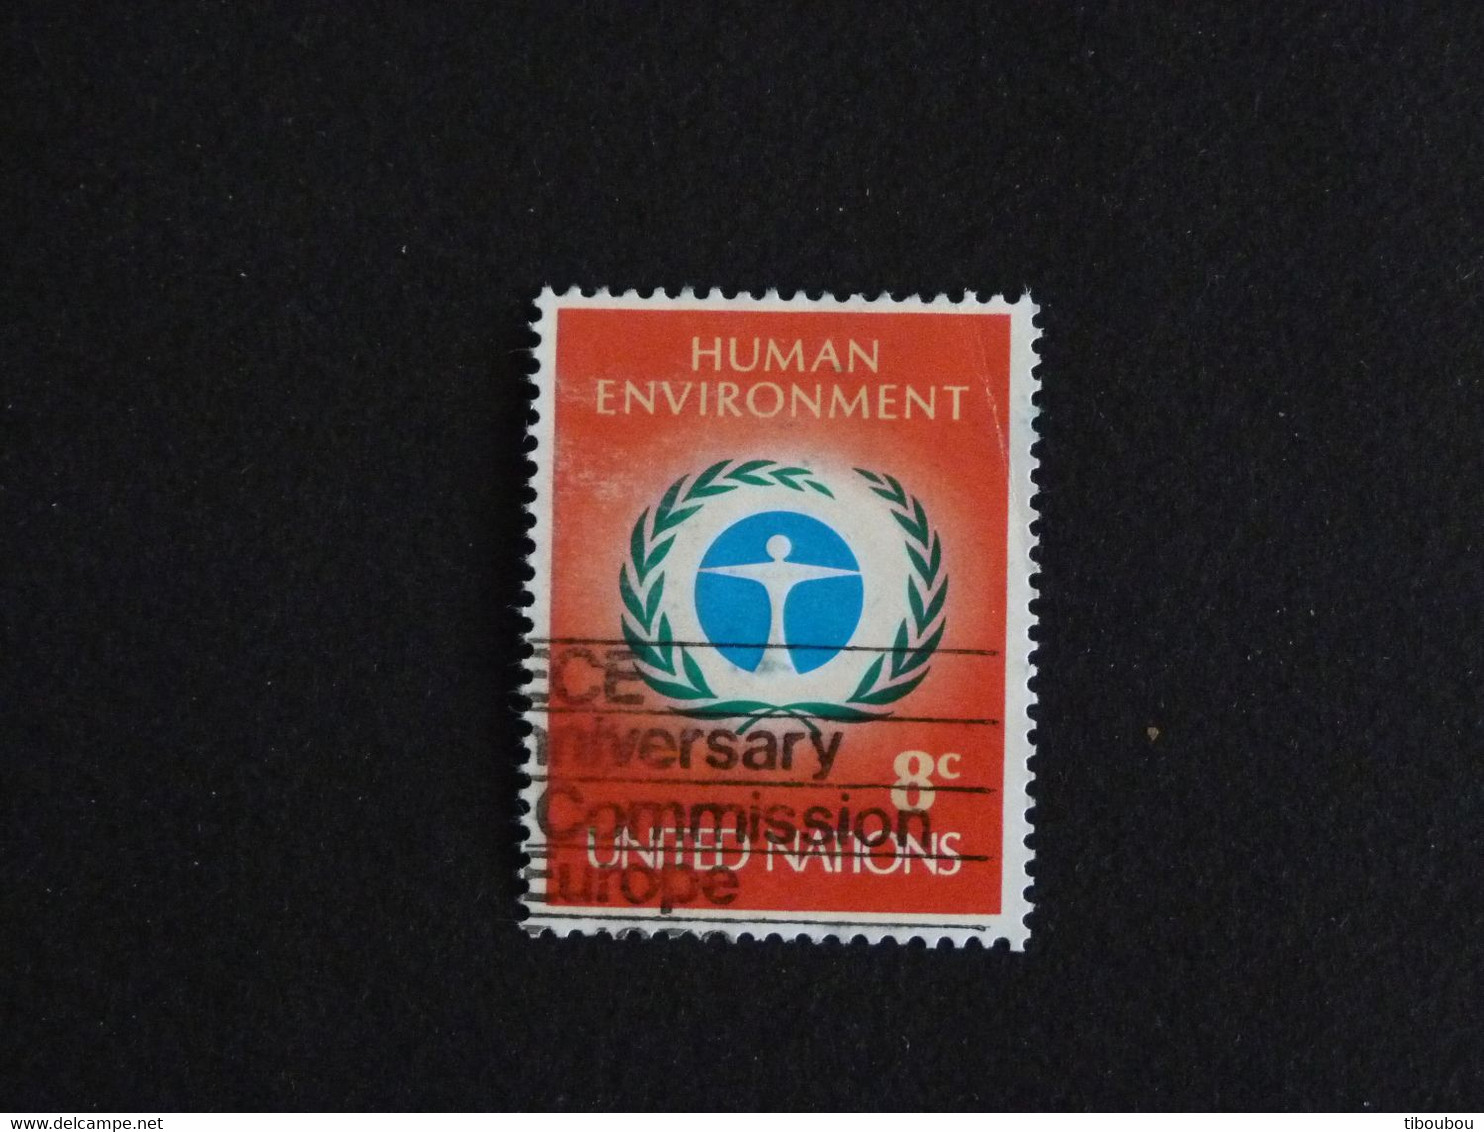 NATIONS UNIES UNITED NATIONS ONU NEW YORK YT 222 OBLITERE - CONFERENCE SUR ENVIRONNEMENT - Gebraucht